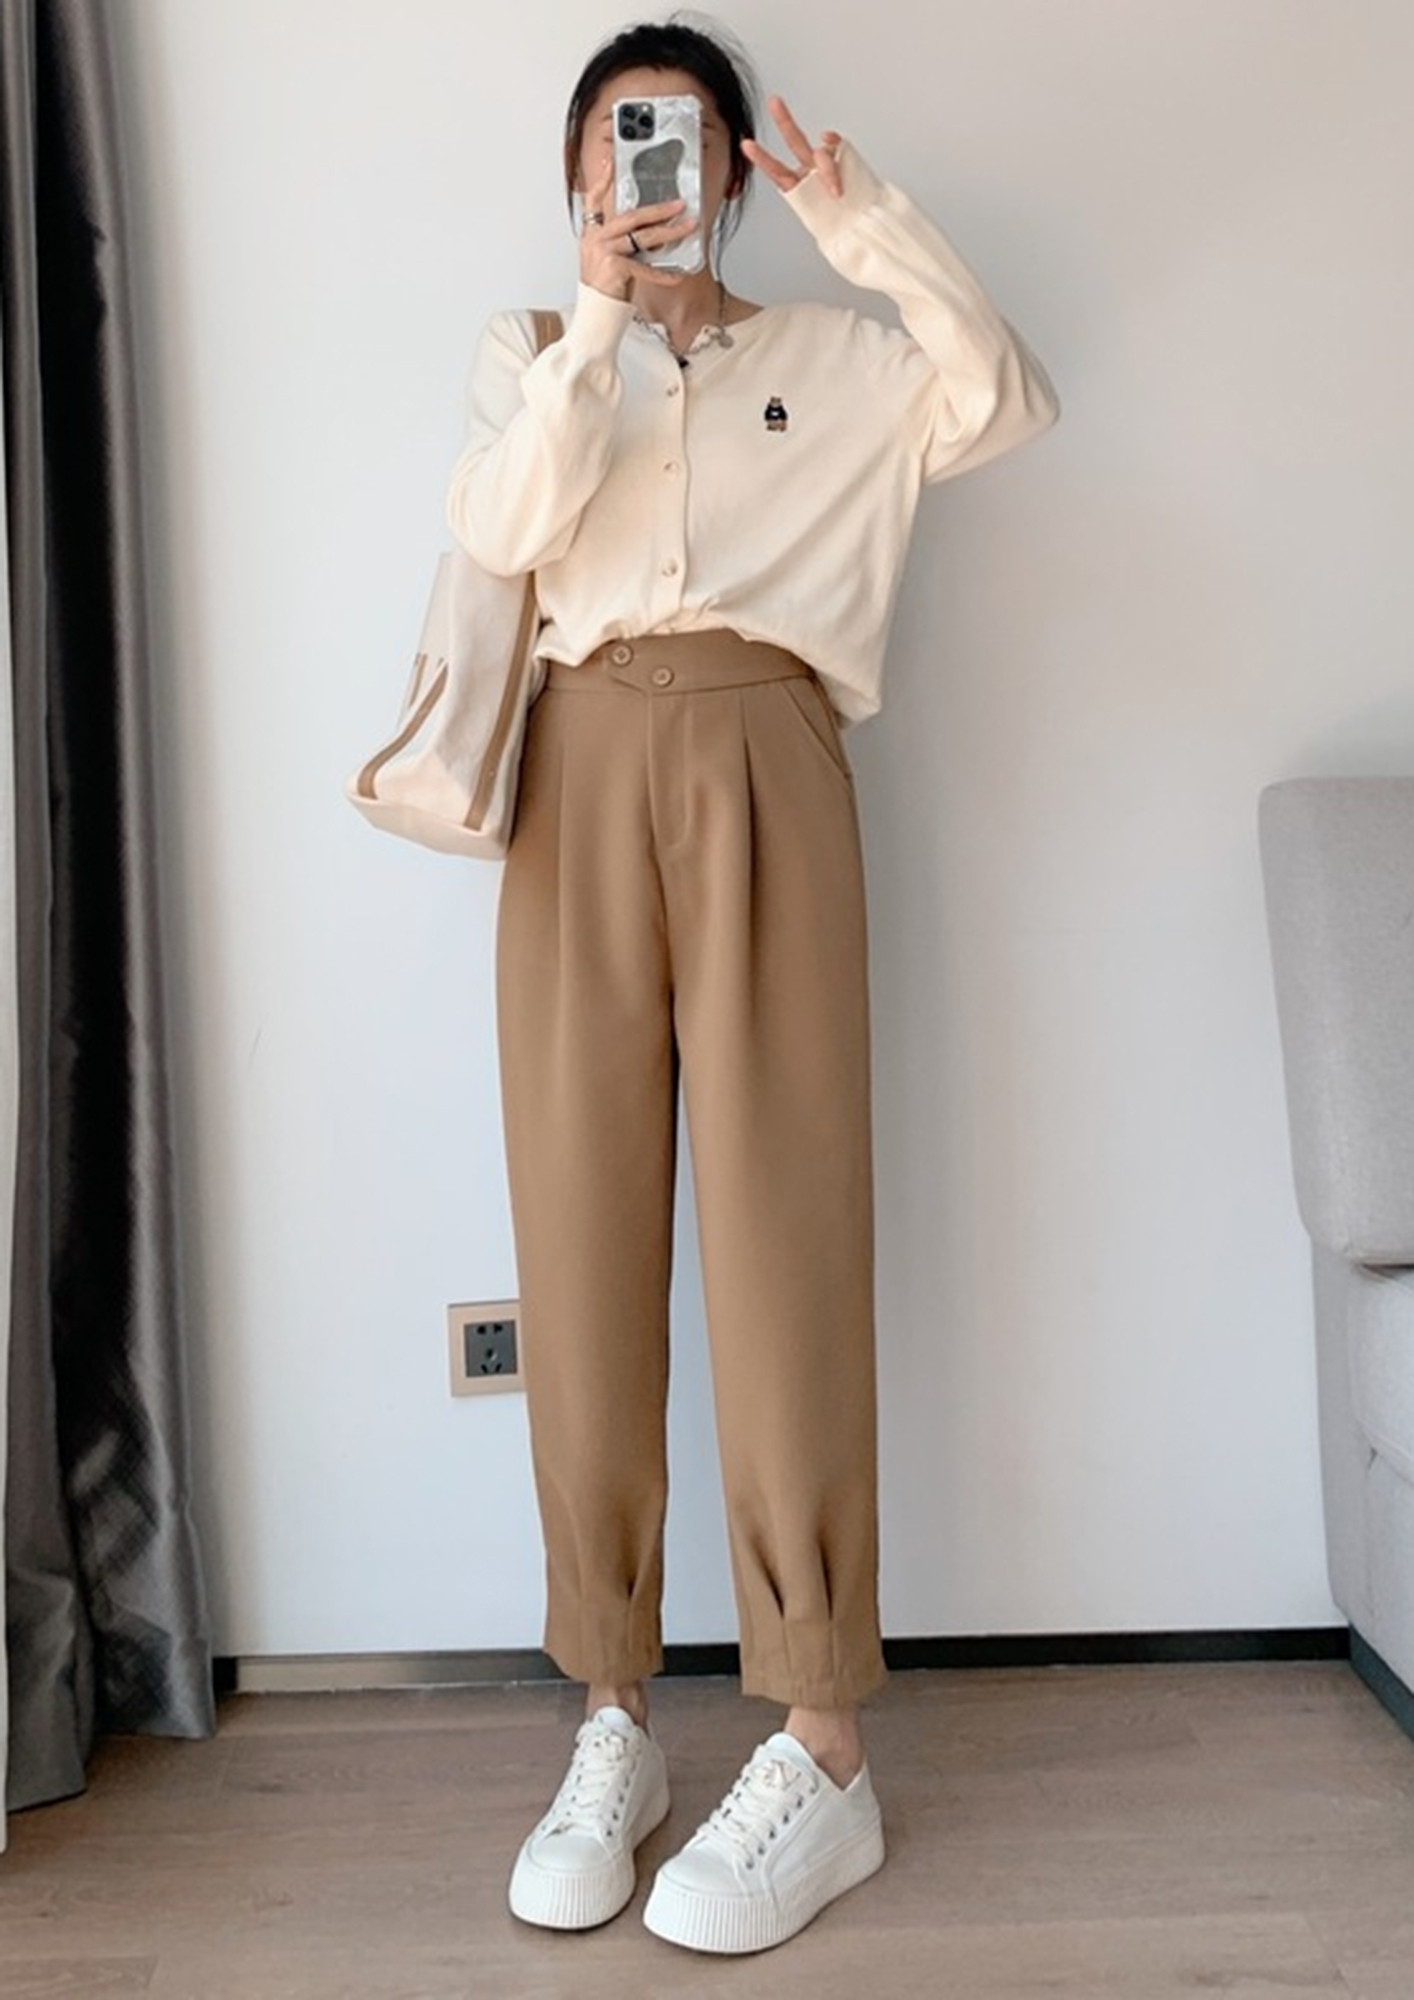 White Shirt with Khaki Pants Outfit for Women